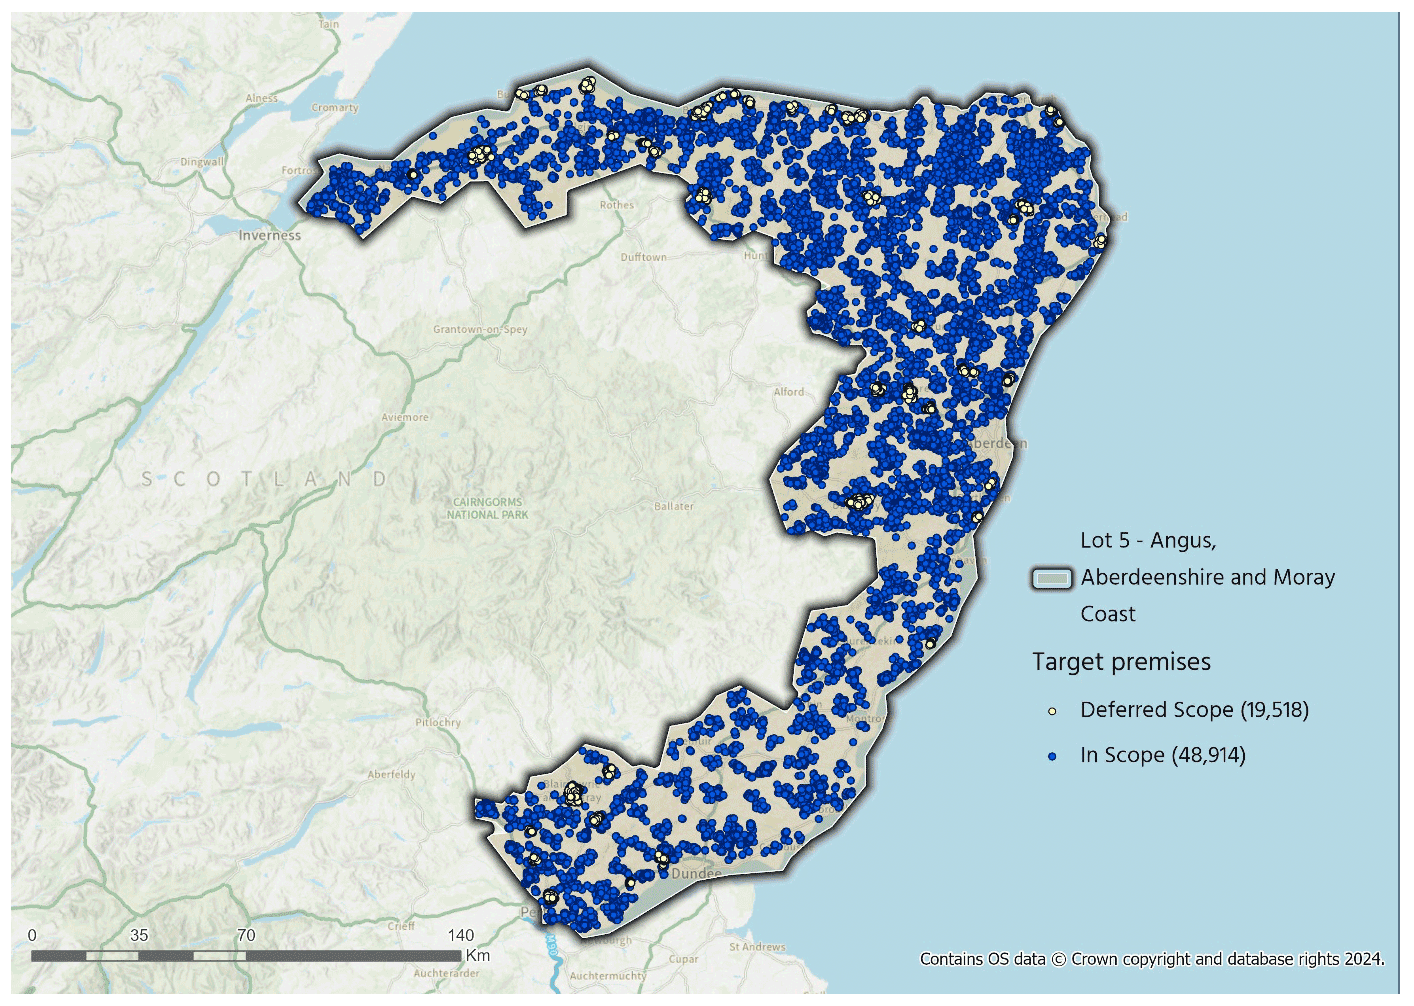 A map showing the Lot 5 boundary with all 48,914 in-scope premises and 19,518 deferred scope premises included. 